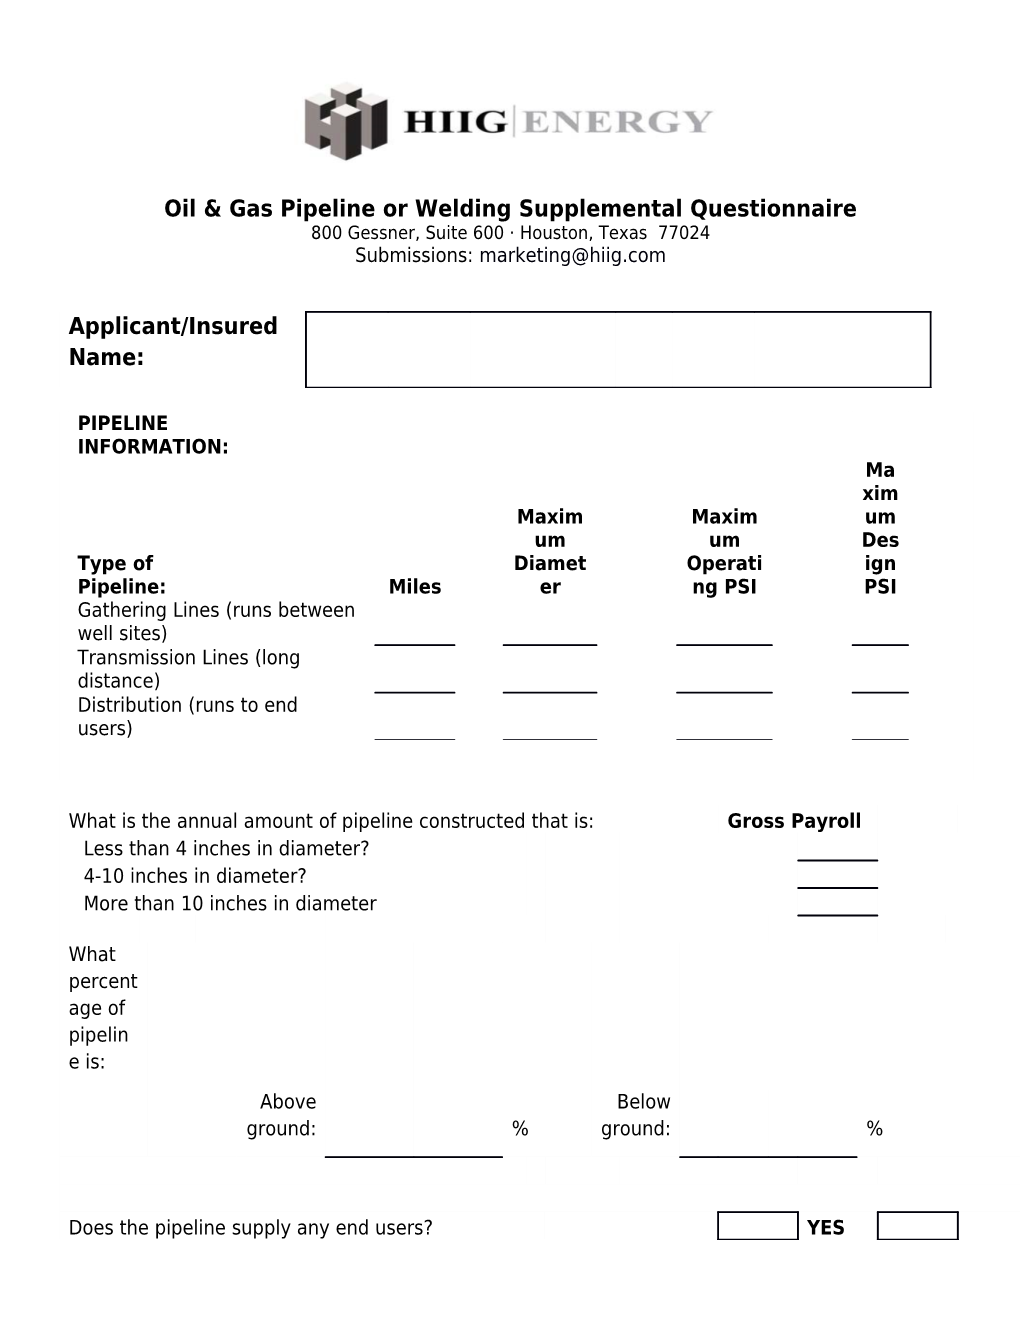 Oil & Gas Pipeline Or Welding Supplemental Questionnaire